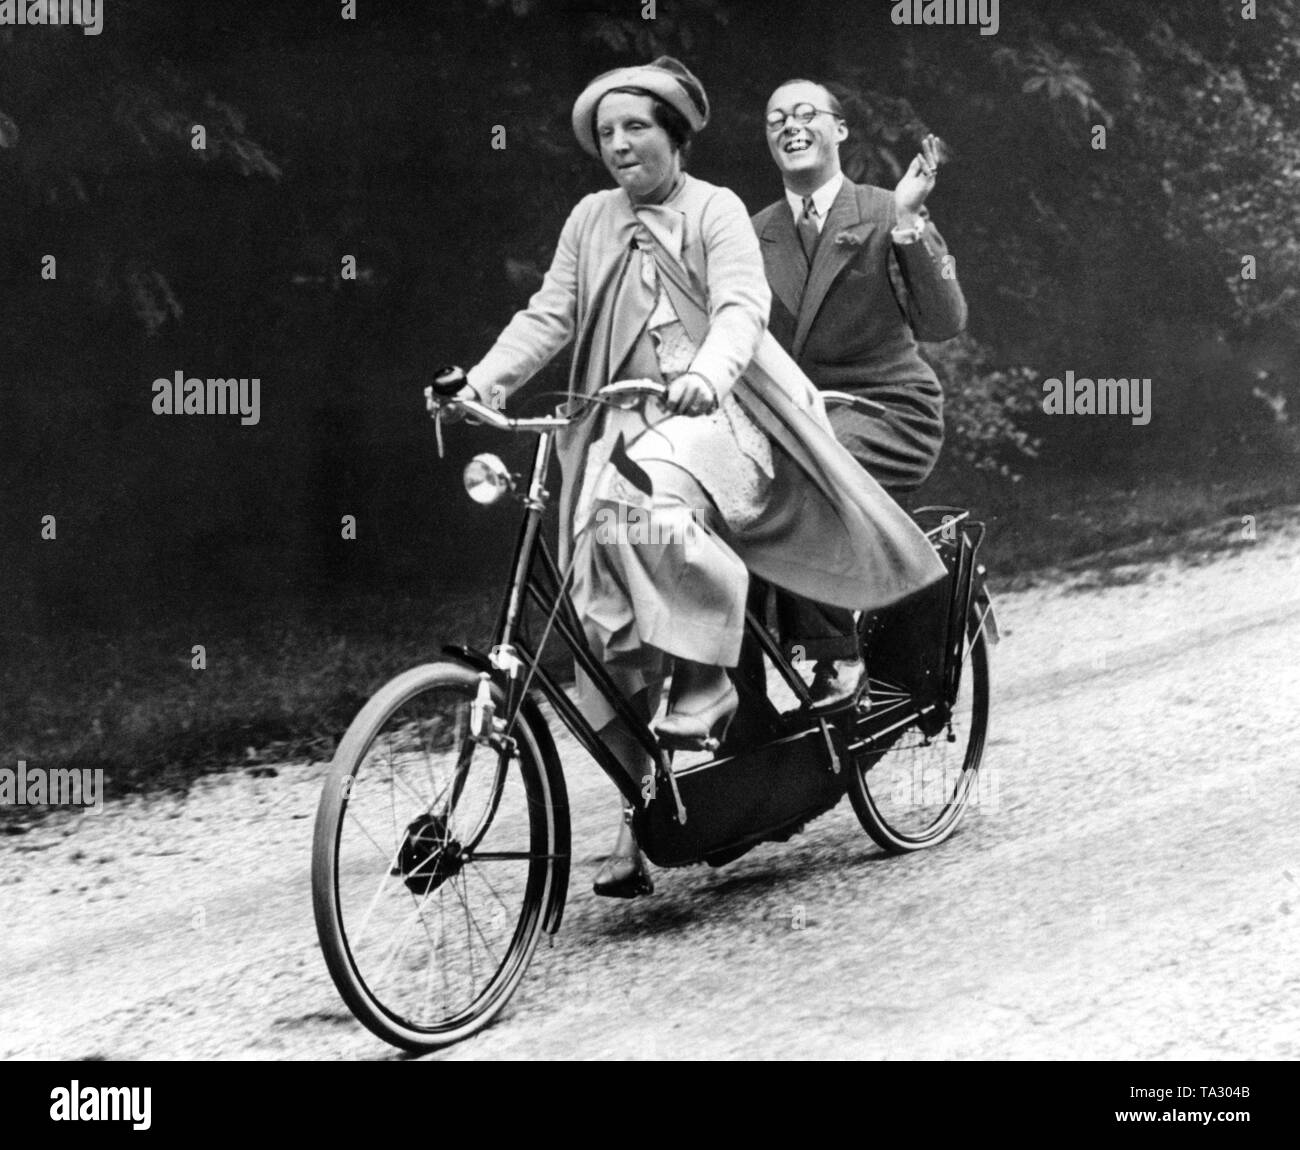 Princess Juliana of the Netherlands and her future bridegroom Prince Bernhard von Lippe-Biesterfeld ride together on a tandem. Stock Photo